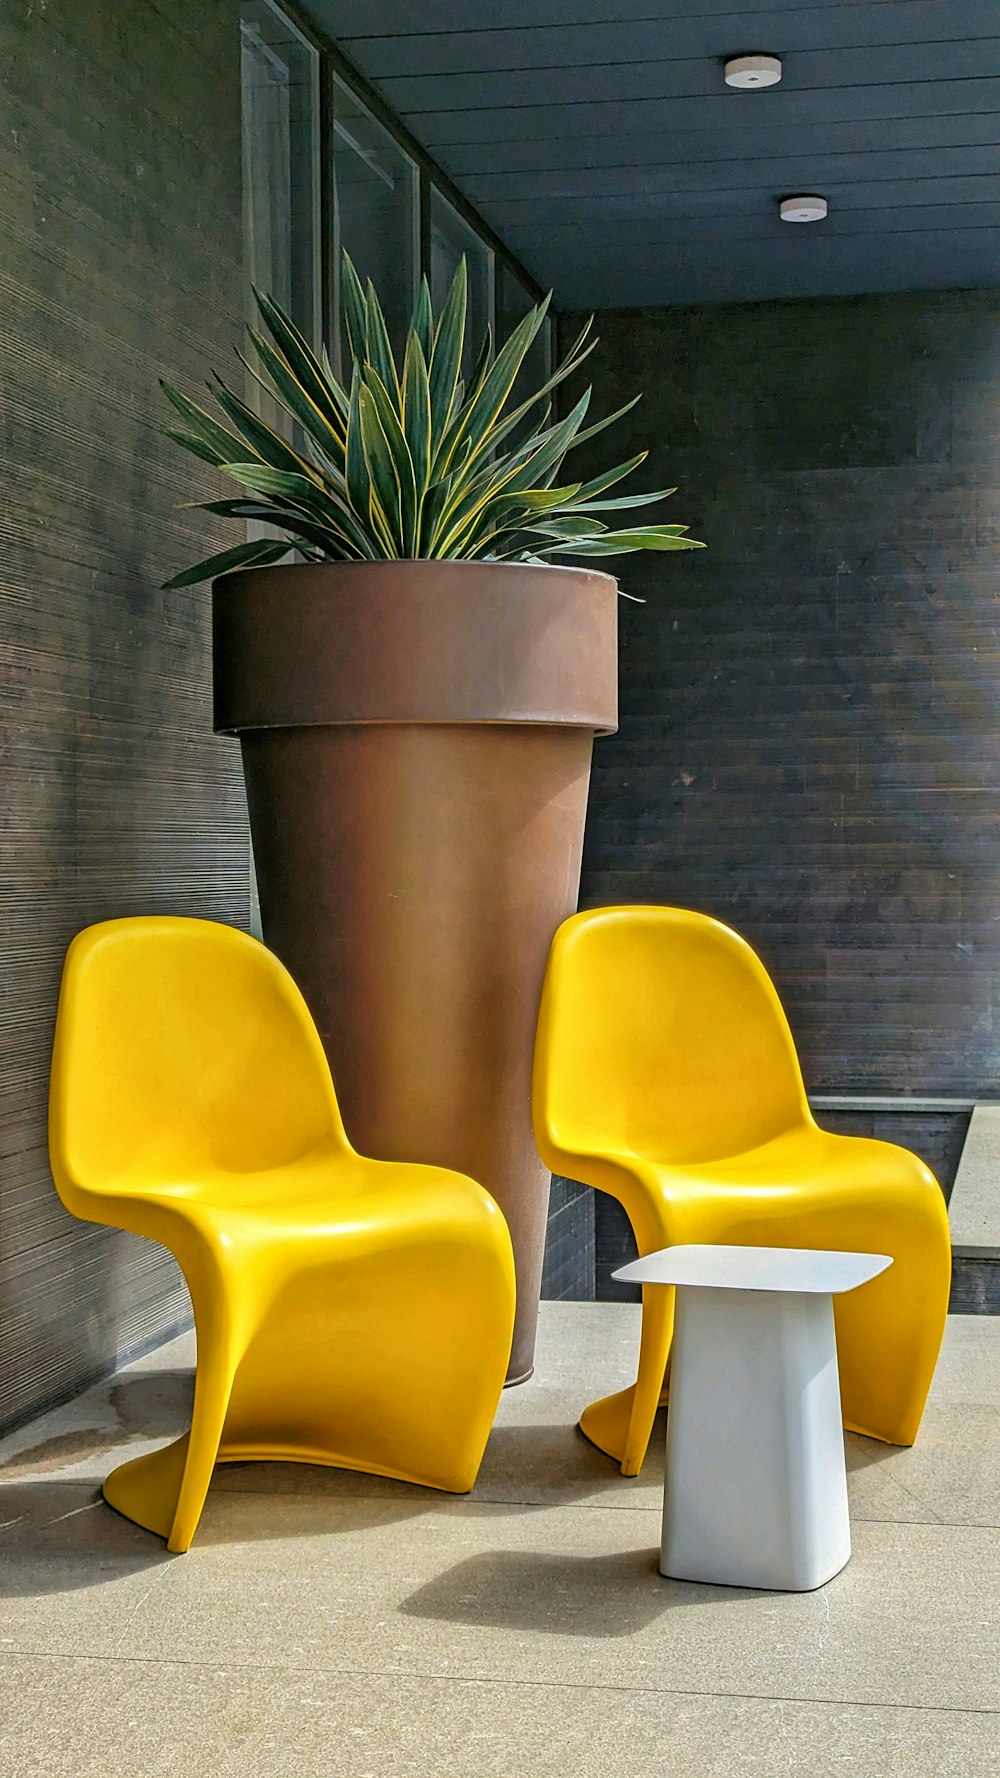 a couple of yellow chairs sitting next to a potted plant